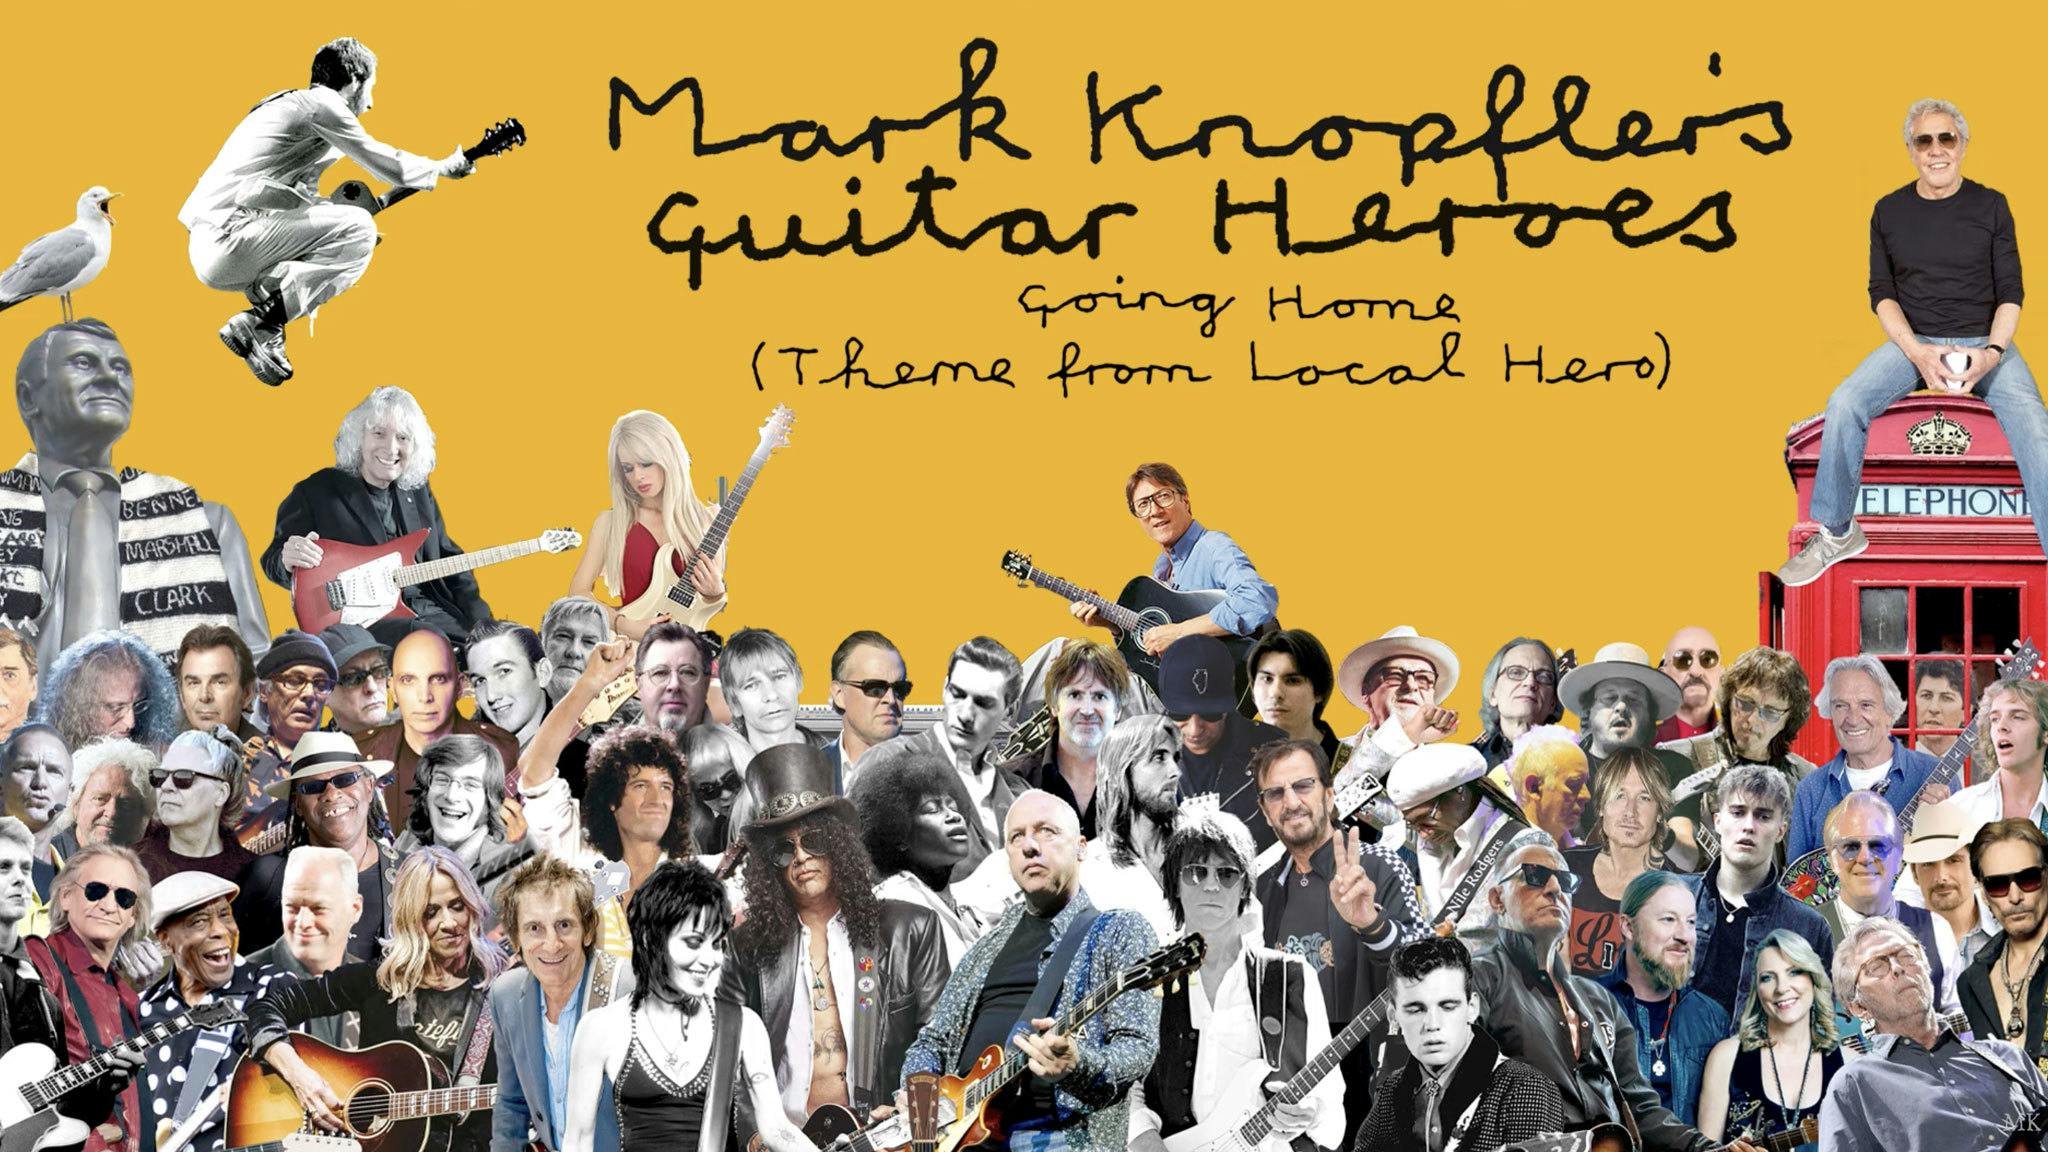 Hear over 60 legendary musicians on a new charity song for Teenage Cancer Trust